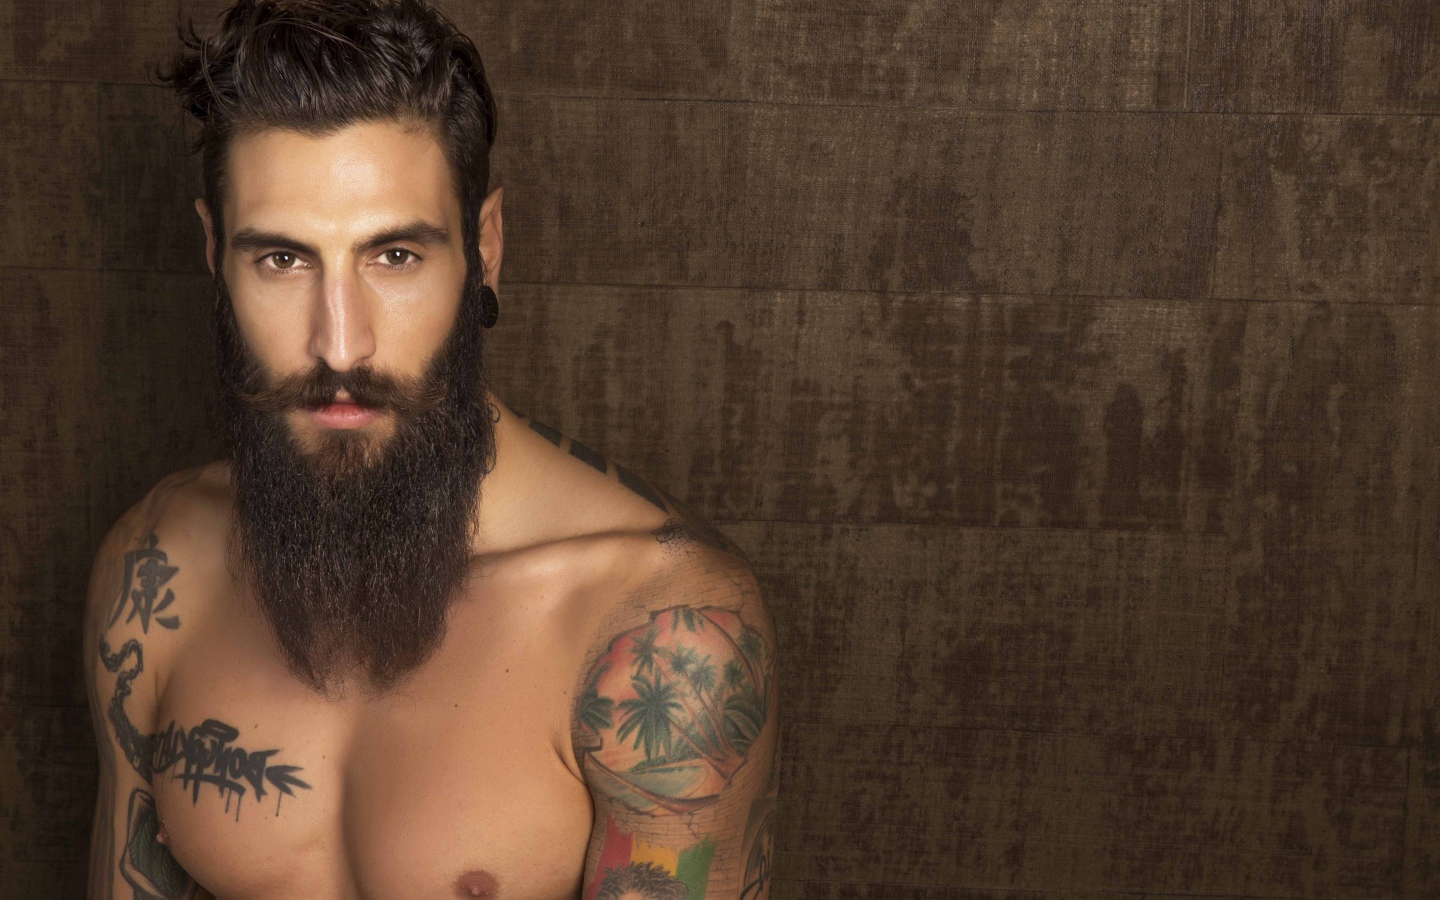 A young guy model Matteo Marinelli with a beard and tattoos on his body